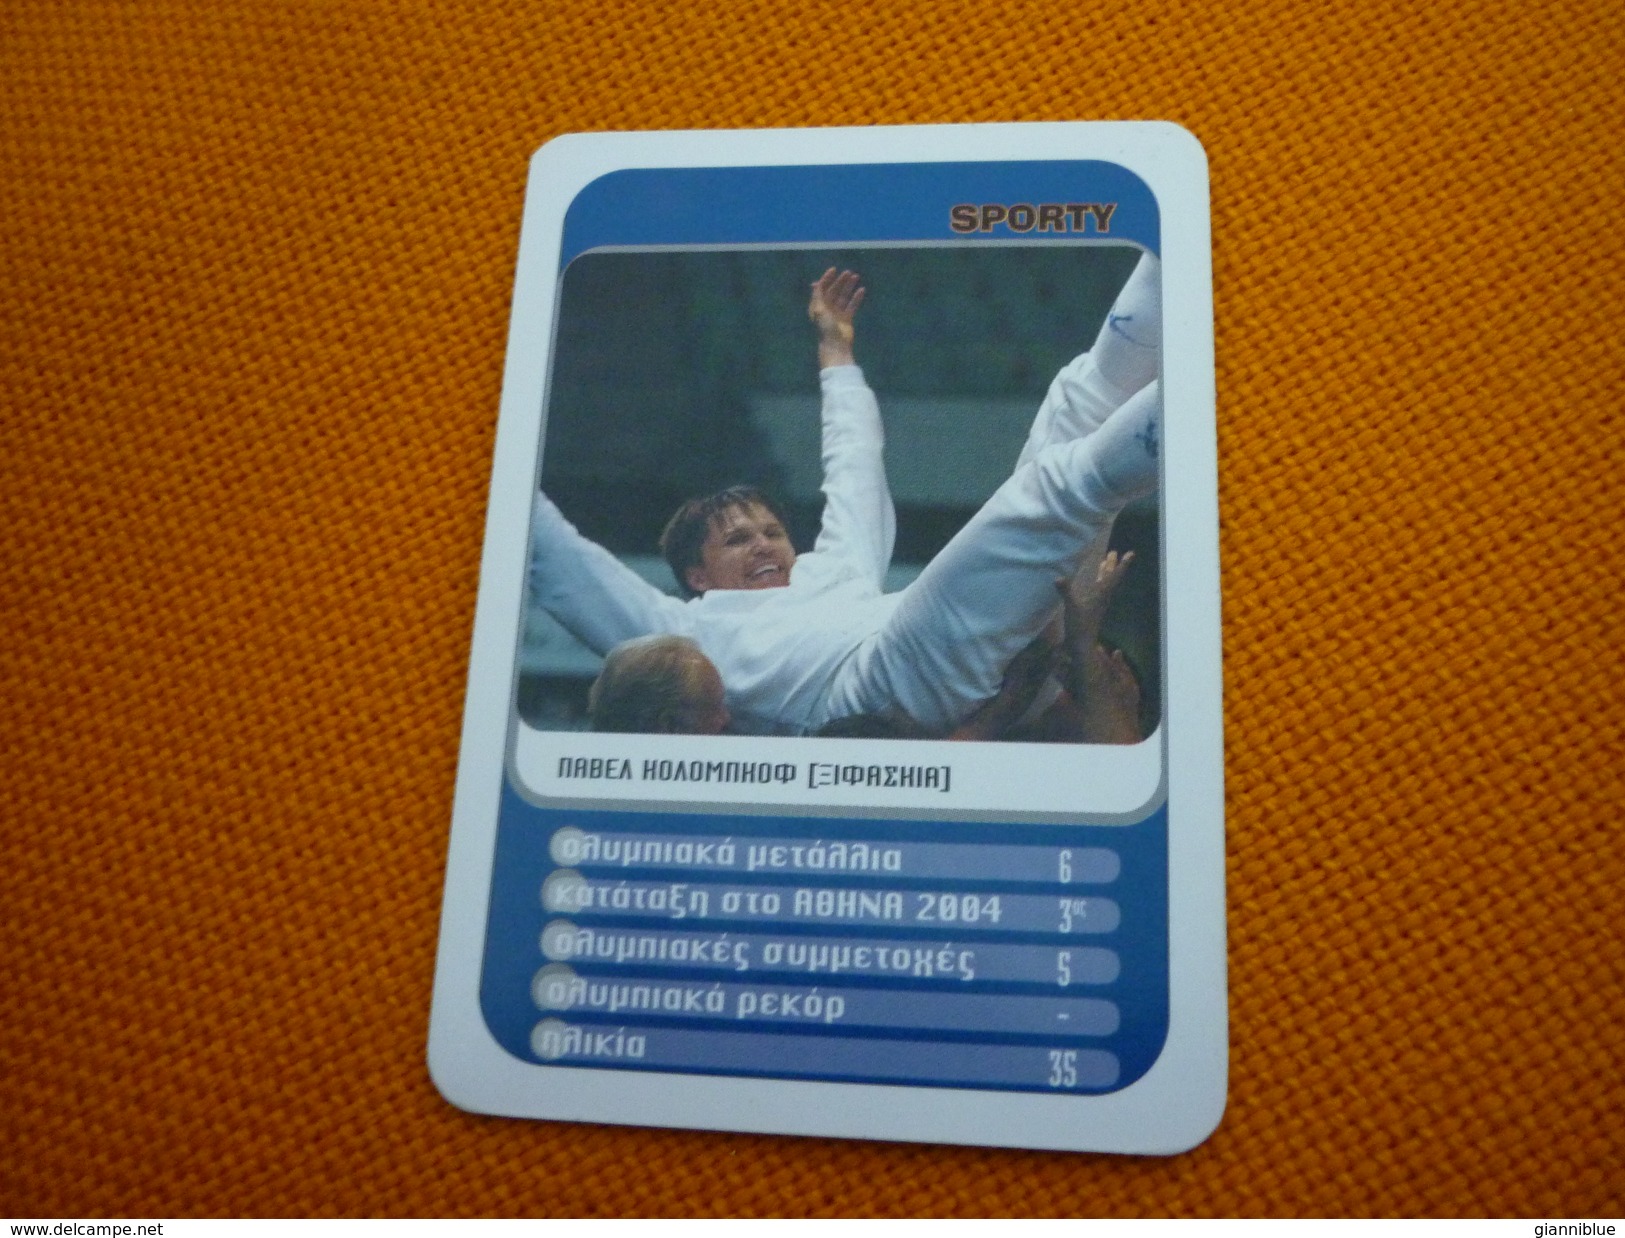 Pavel Kolobkov Russian Fencer Fencing Athens 2004 Olympic Games Medalist Greece Greek Trading Card - Trading Cards